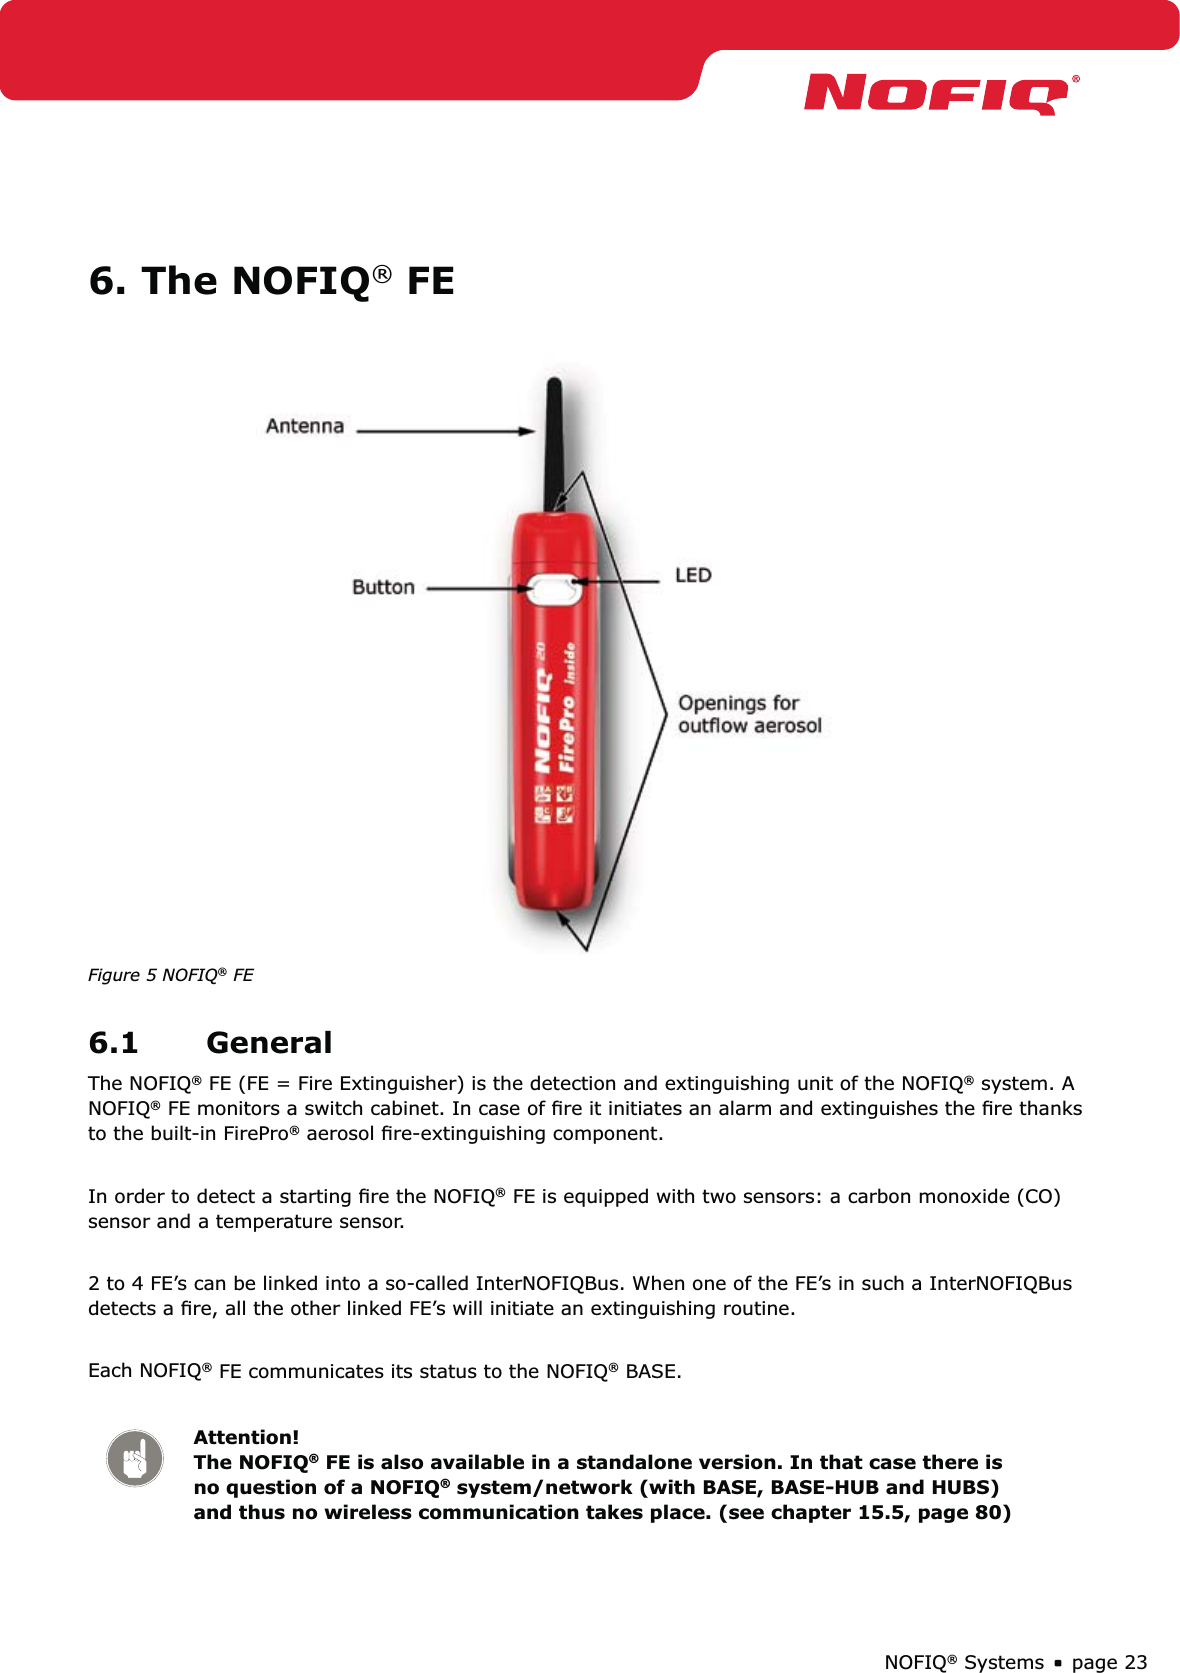 page 23NOFIQ® Systems6. The NOFIQ® FE Figure 5 NOFIQ® FE6.1 GeneralThe NOFIQ® FE (FE = Fire Extinguisher) is the detection and extinguishing unit of the NOFIQ® system. A NOFIQ® FE monitors a switch cabinet. In case of ﬁre it initiates an alarm and extinguishes the ﬁre thanks to the built-in FirePro® aerosol ﬁre-extinguishing component. In order to detect a starting ﬁre the NOFIQ® FE is equipped with two sensors: a carbon monoxide (CO) sensor and a temperature sensor. 2 to 4 FE’s can be linked into a so-called InterNOFIQBus. When one of the FE’s in such a InterNOFIQBus detects a ﬁre, all the other linked FE’s will initiate an extinguishing routine.Each NOFIQ® FE communicates its status to the NOFIQ® BASE. Attention! The NOFIQ® FE is also available in a standalone version. In that case there is no question of a NOFIQ® system/network (with BASE, BASE-HUB and HUBS) and thus no wireless communication takes place. (see chapter 15.5, page 80)